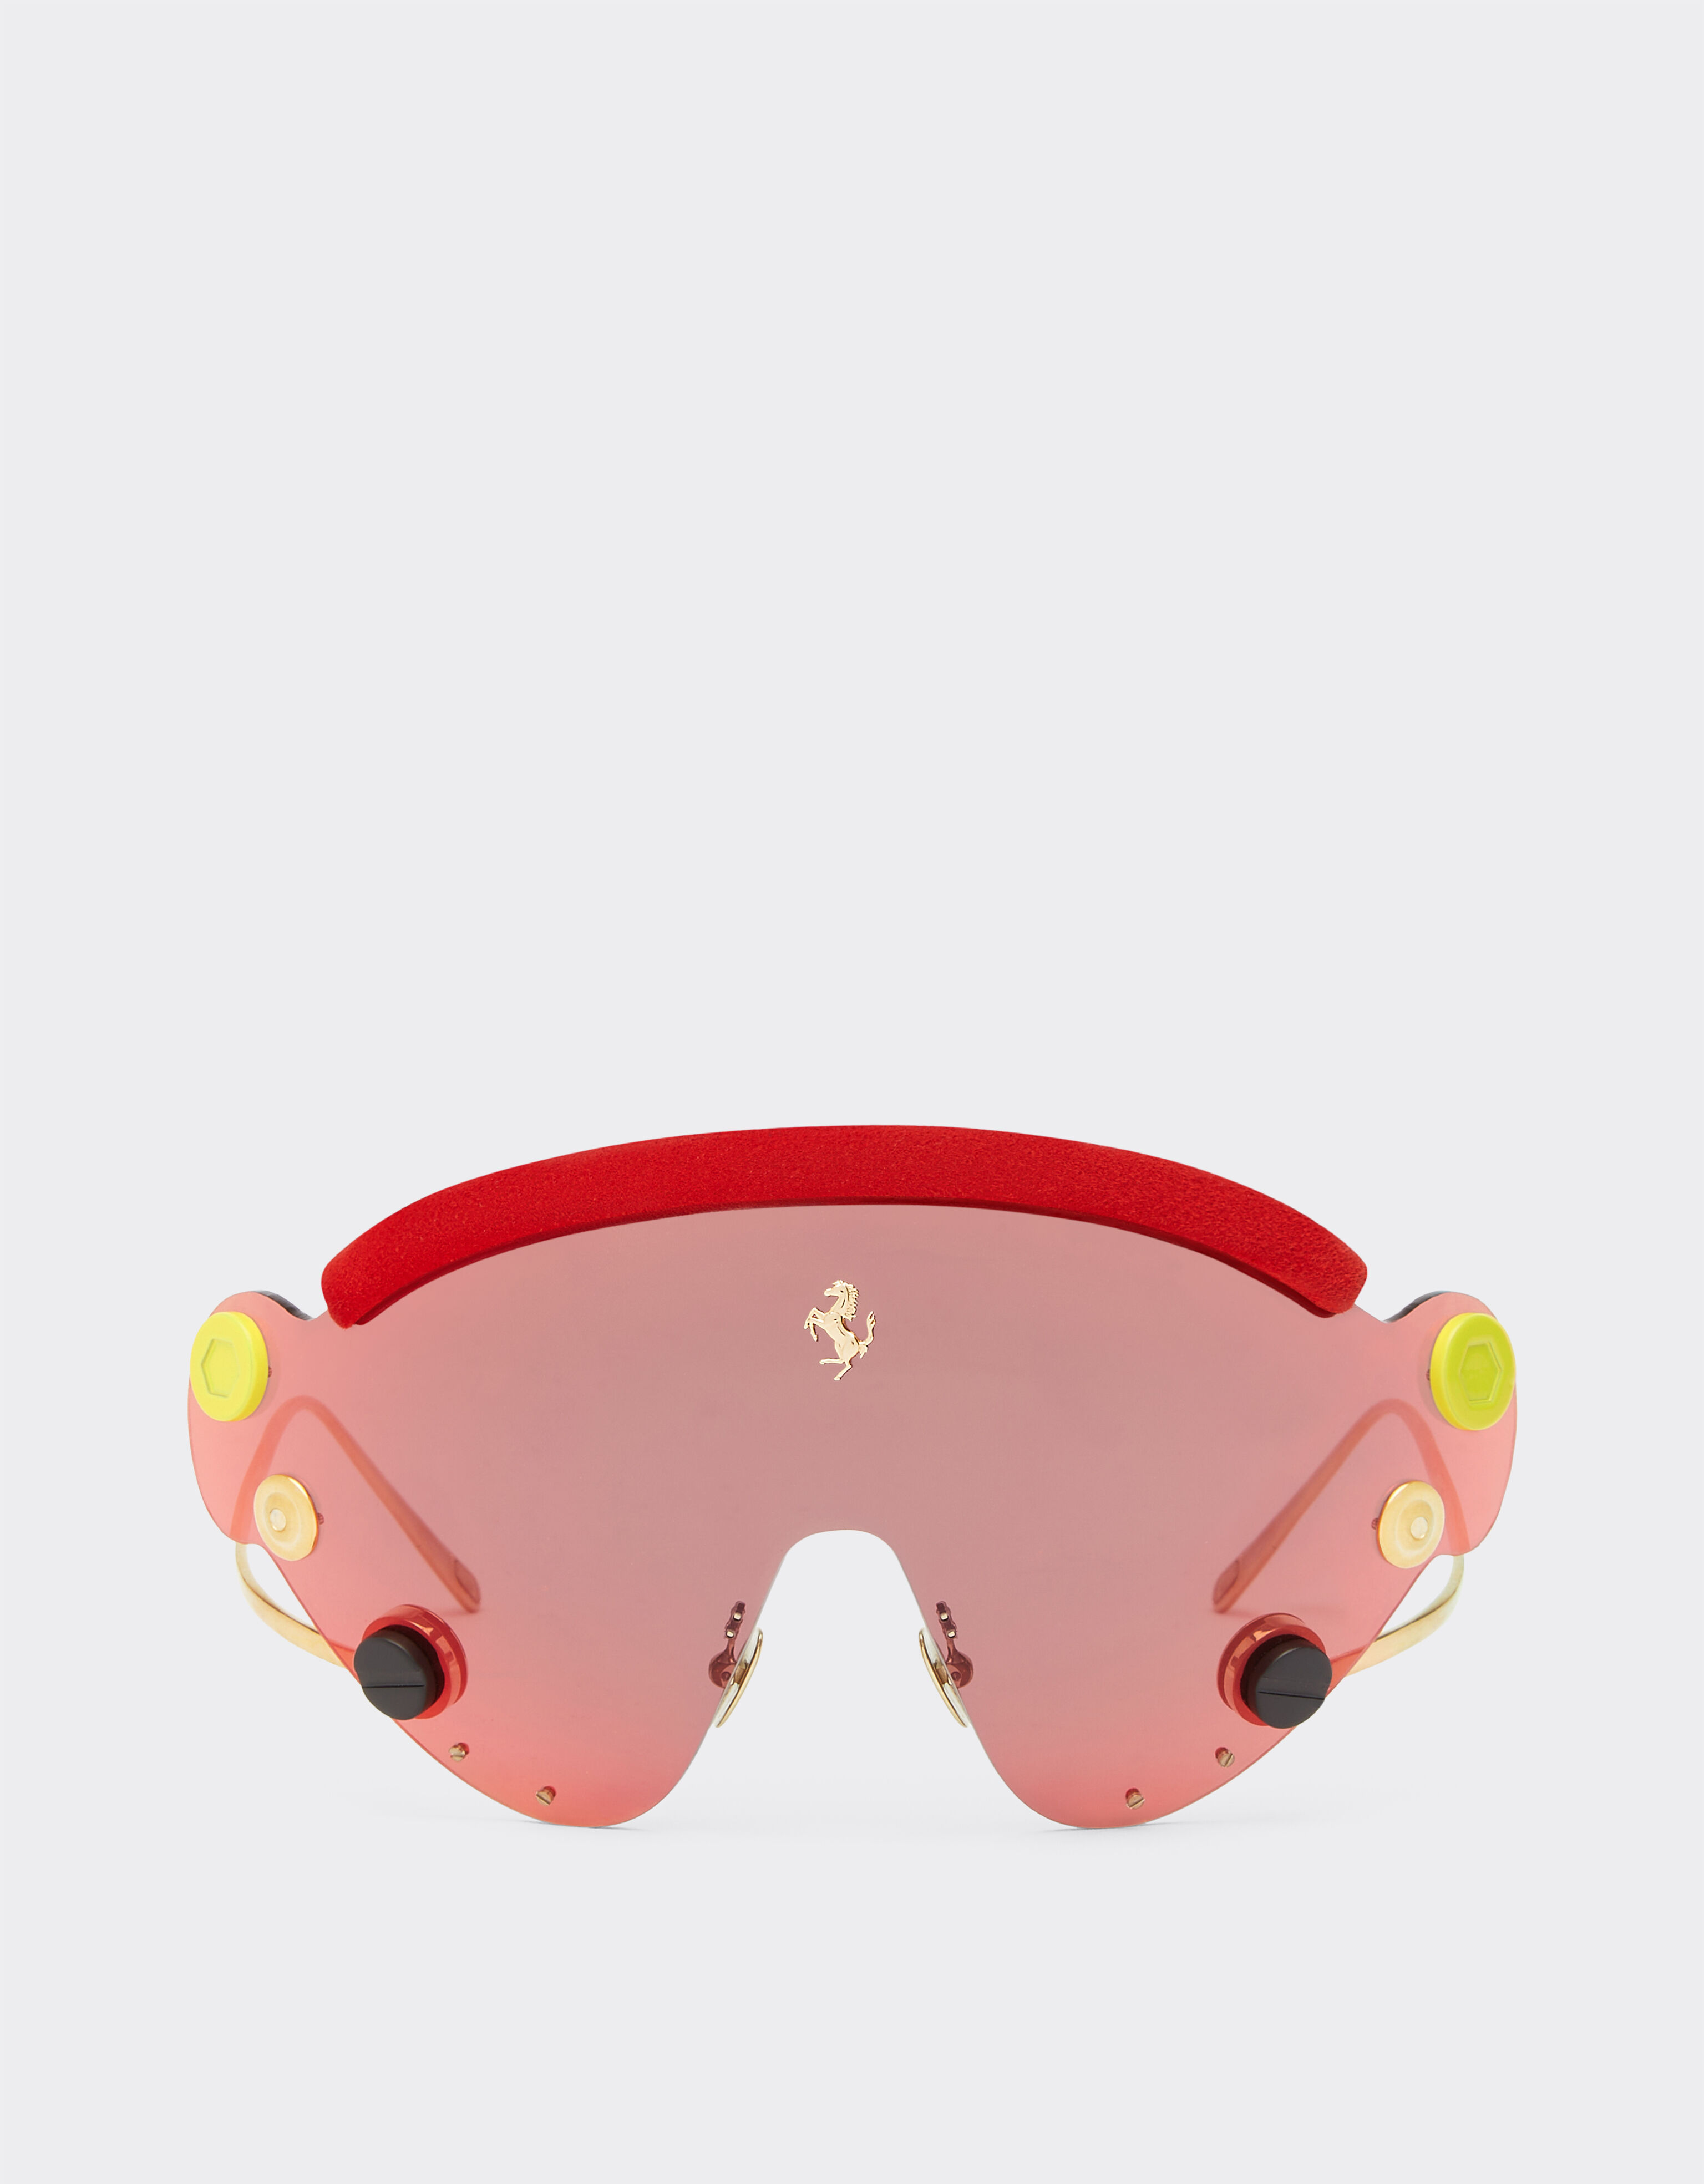 Ferrari Limited Edition Ferrari sunglasses in red and gold-tone metal with red mirror shield Gold F0411f